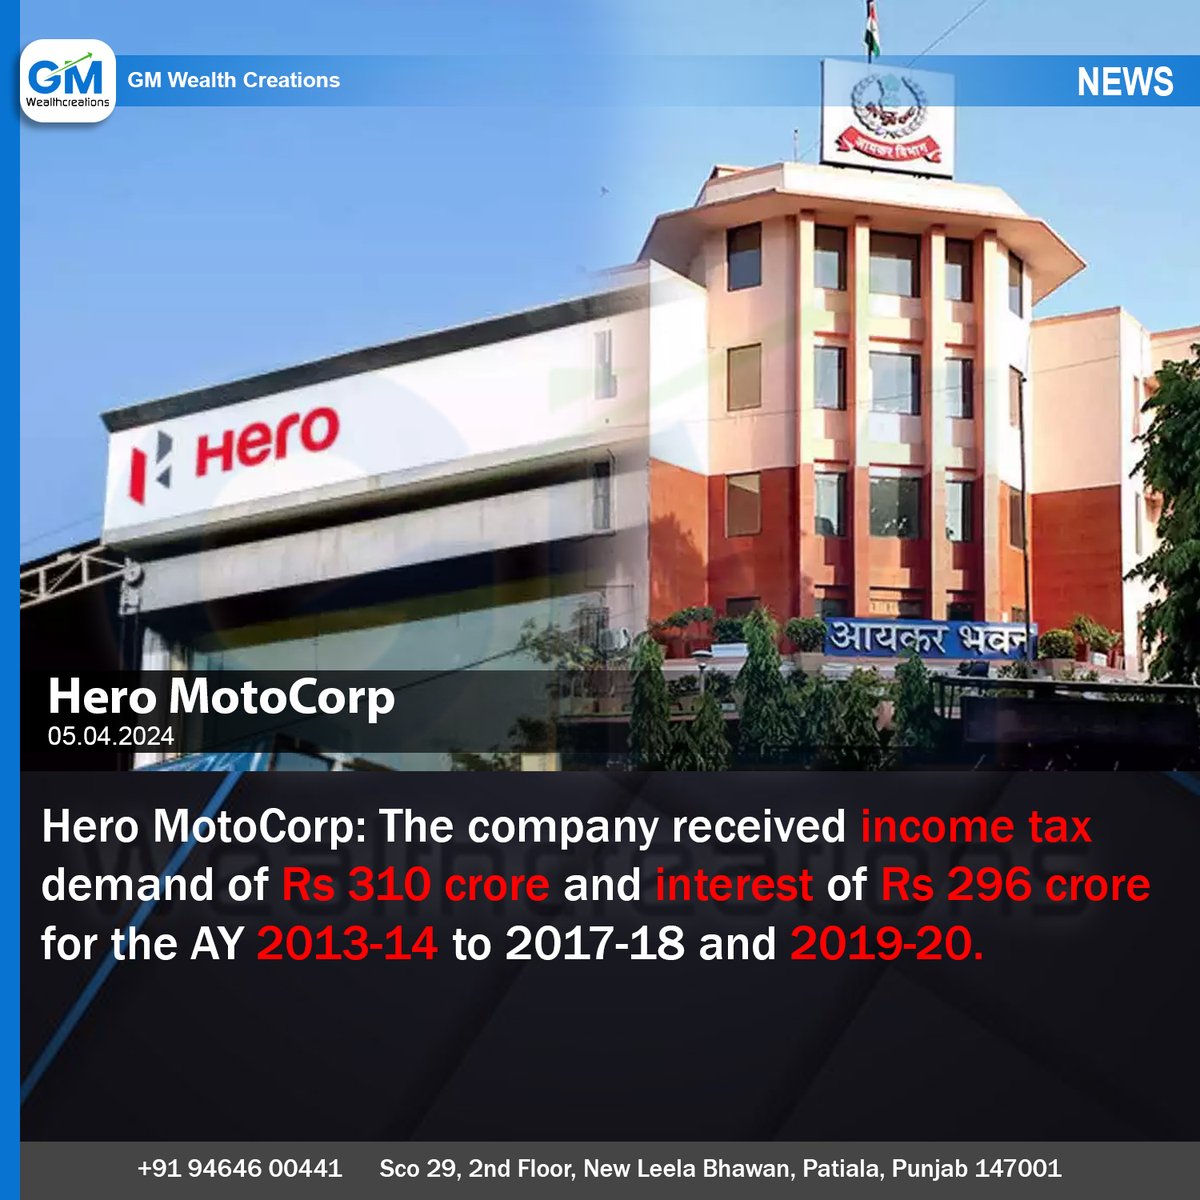 Hero MotoCorp: The company received income tax 
demand of Rs 310 crore and interest of Rs 296 crore 
for the AY 2013-14 to 2017-18 and 2019-20.
@HeroMotoCorp @IncomeTaxIndia #IncomeTax #HEROMOTOCO #nseindia